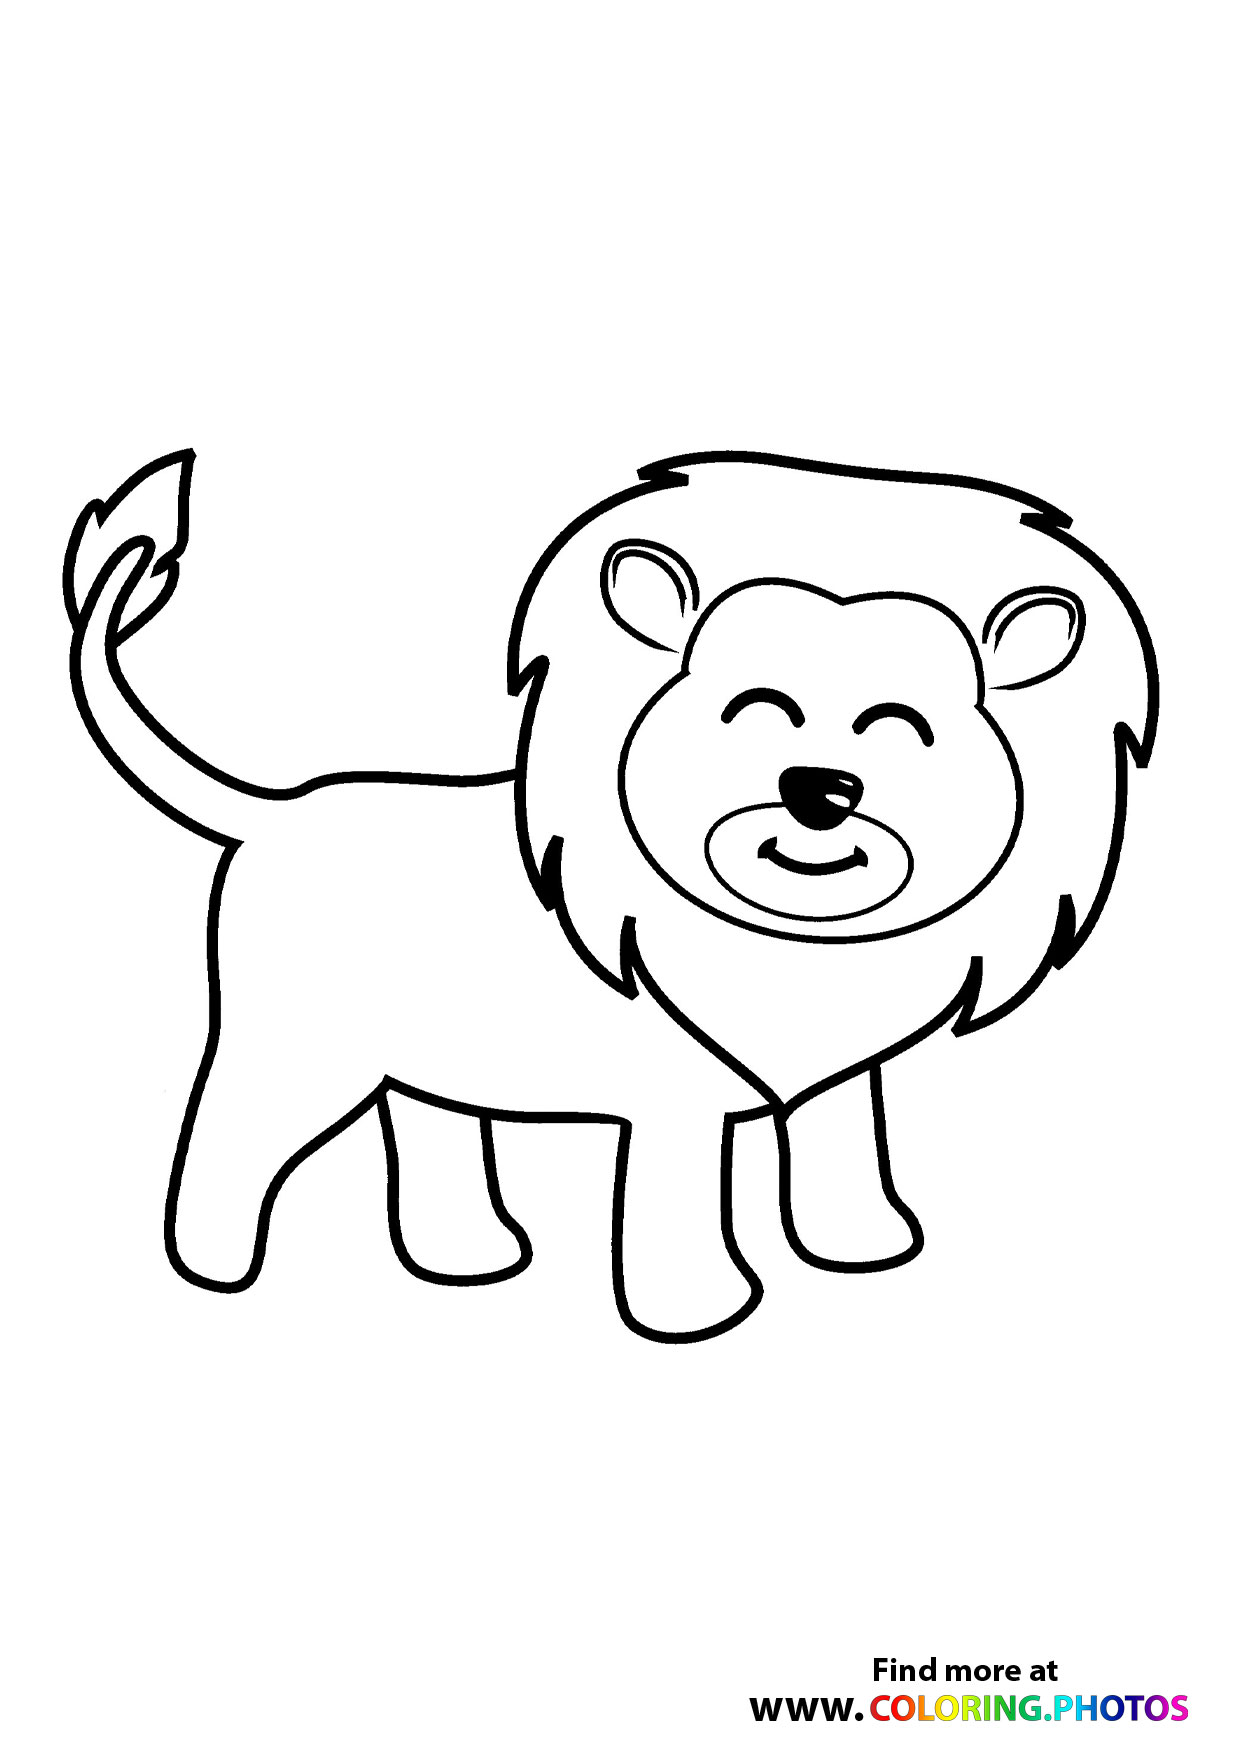 Cute lion smiling - Coloring Pages for kids